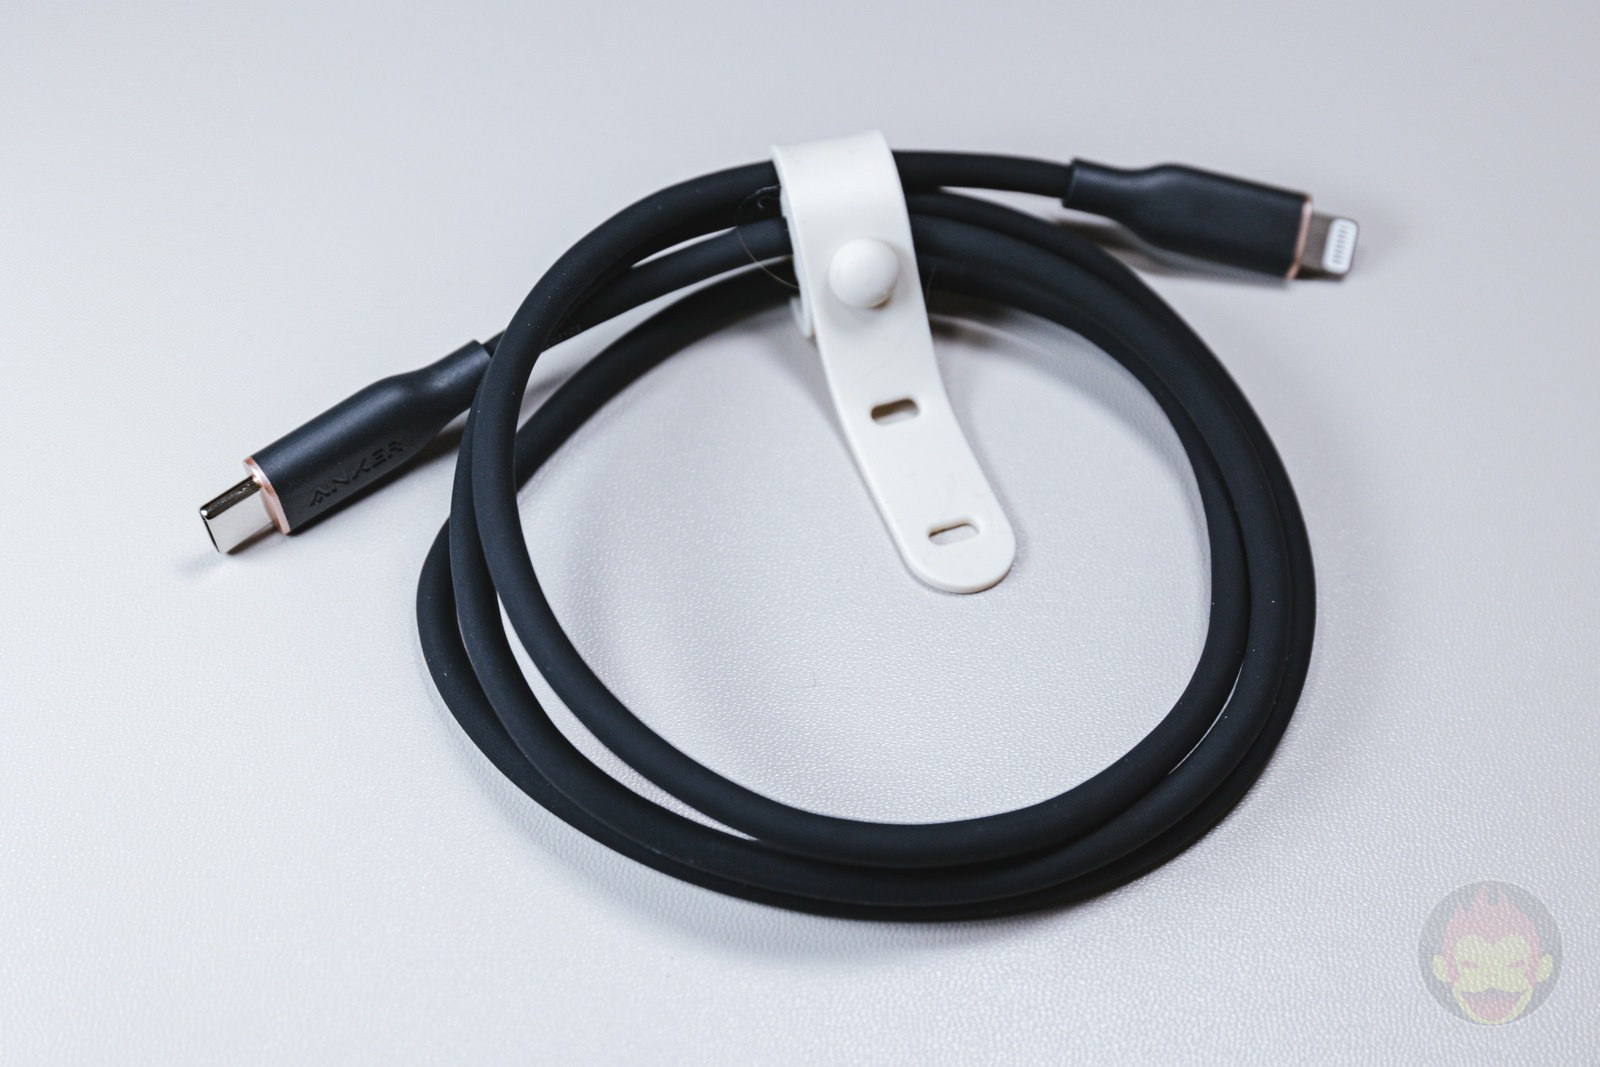 Anker-PowerLine-III-Flow-USBC-to-Lightning-Cable-Review-08.jpg